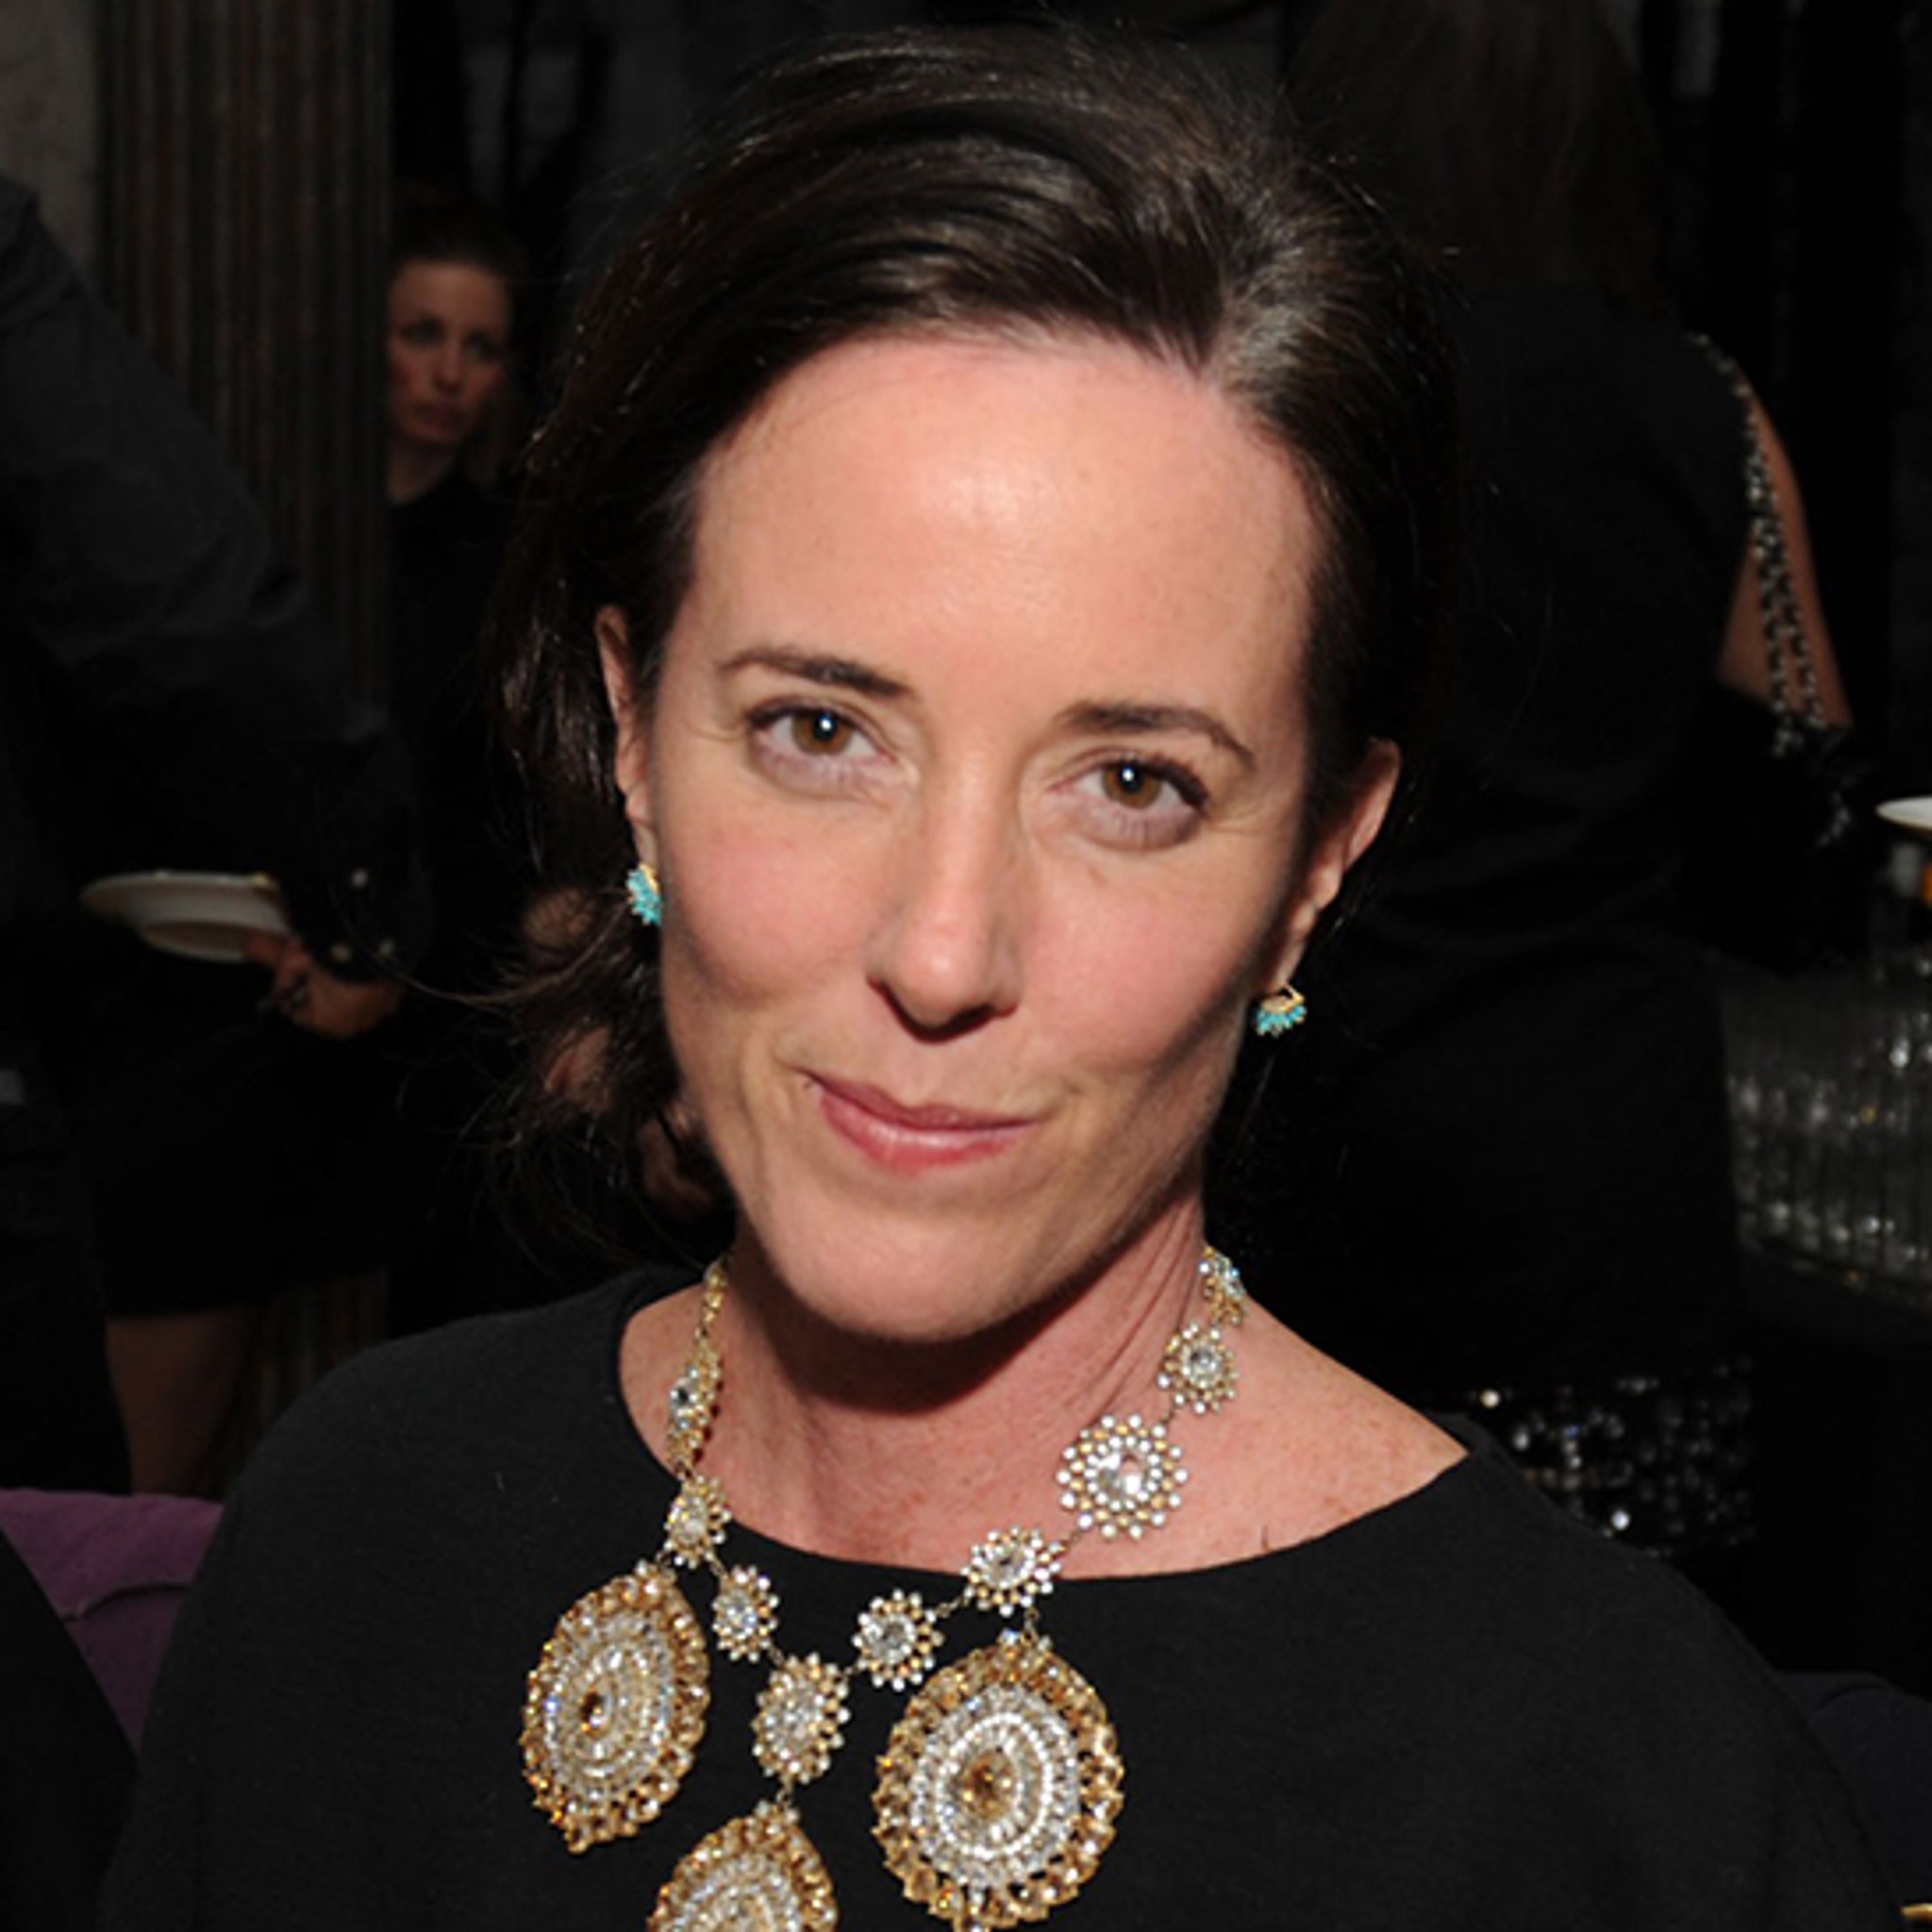 Kate Spade 'Drinking a Lot' and Depressed Over Business Problems, Separation